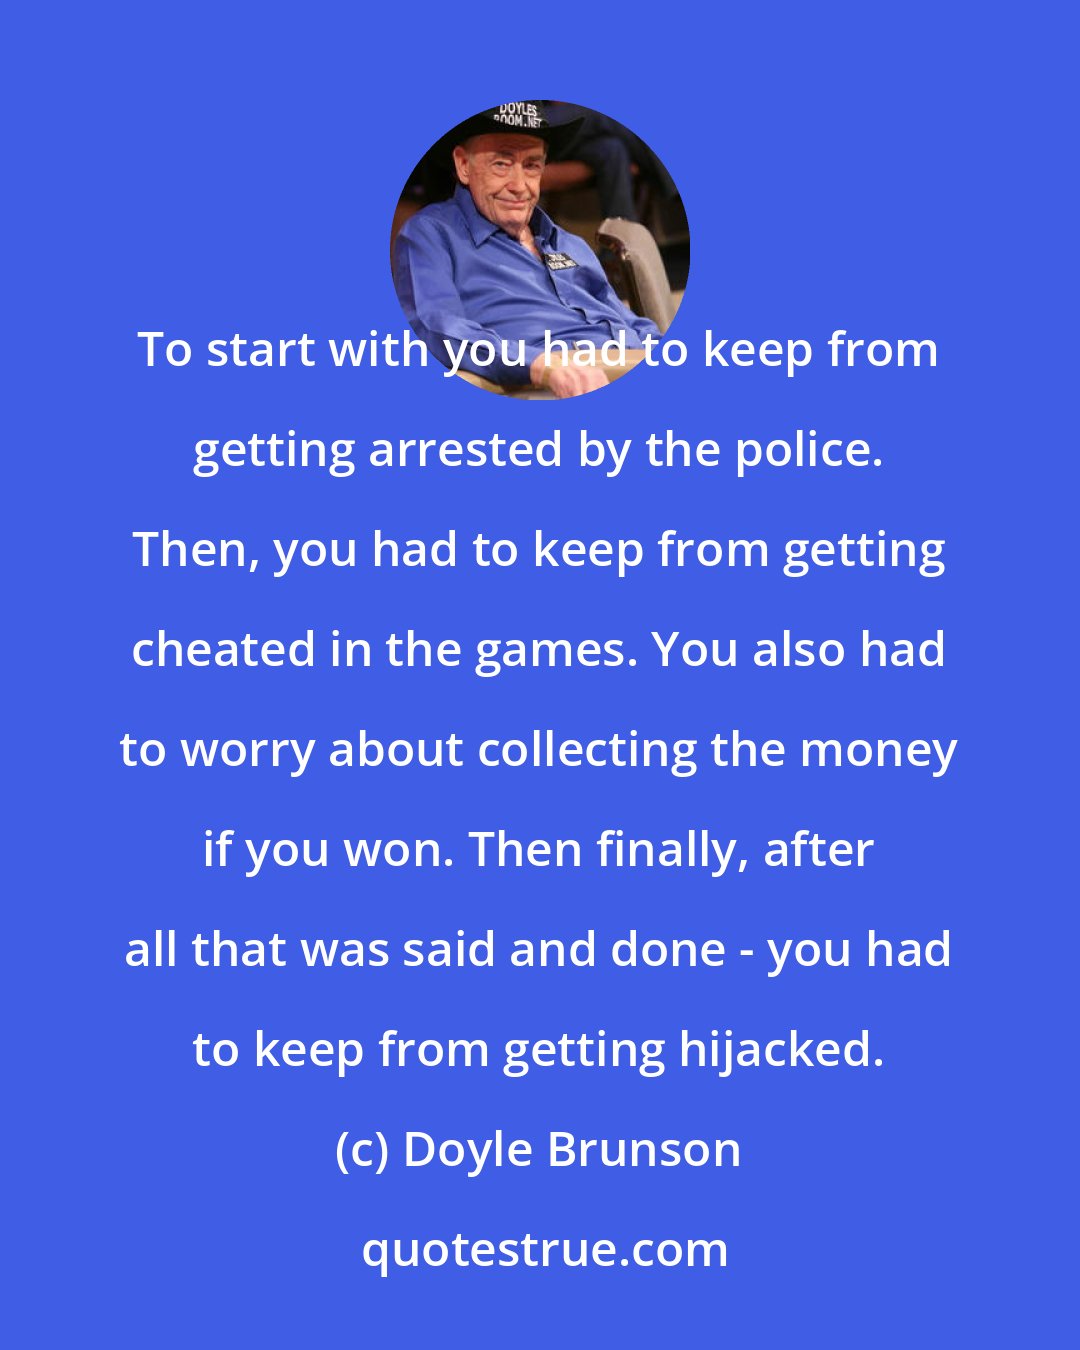 Doyle Brunson: To start with you had to keep from getting arrested by the police. Then, you had to keep from getting cheated in the games. You also had to worry about collecting the money if you won. Then finally, after all that was said and done - you had to keep from getting hijacked.